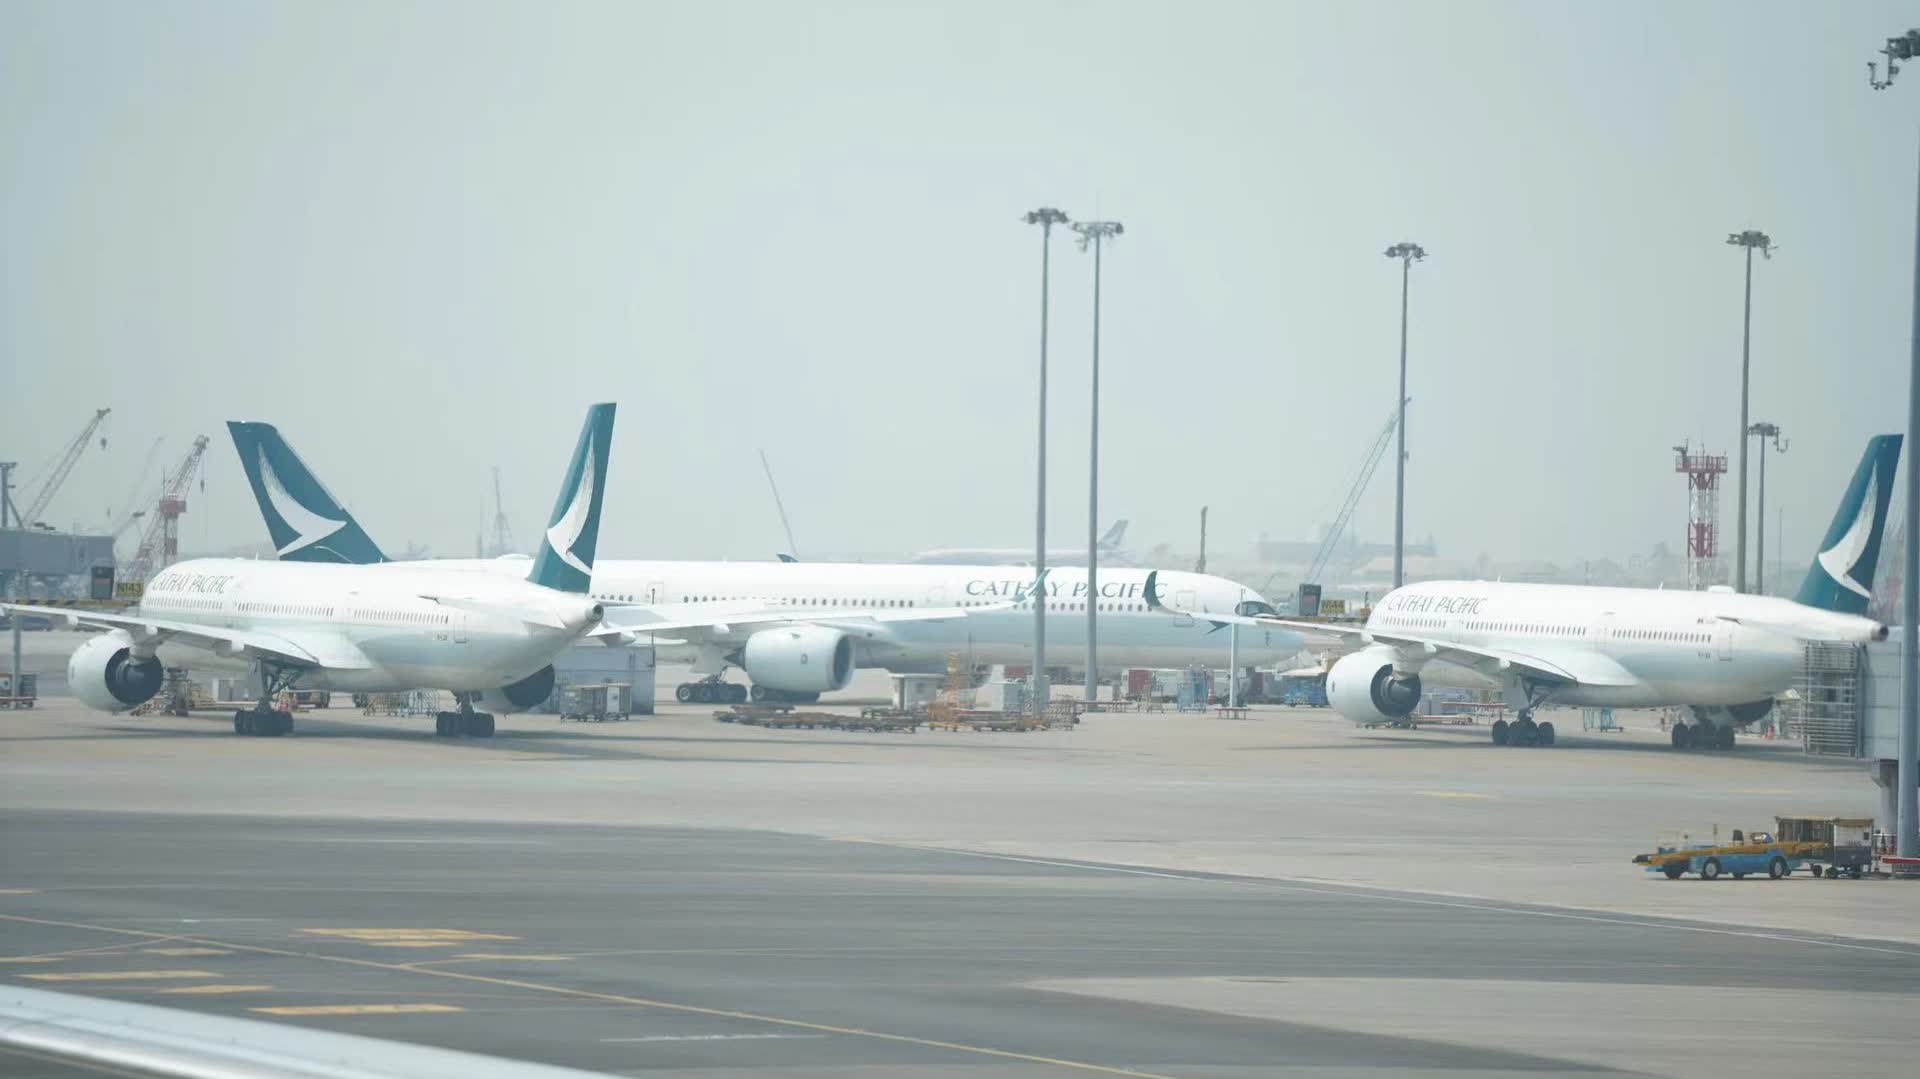 Cathay welcomes govt's Budget Speech initiatives to support and strengthen HK's aviation industry